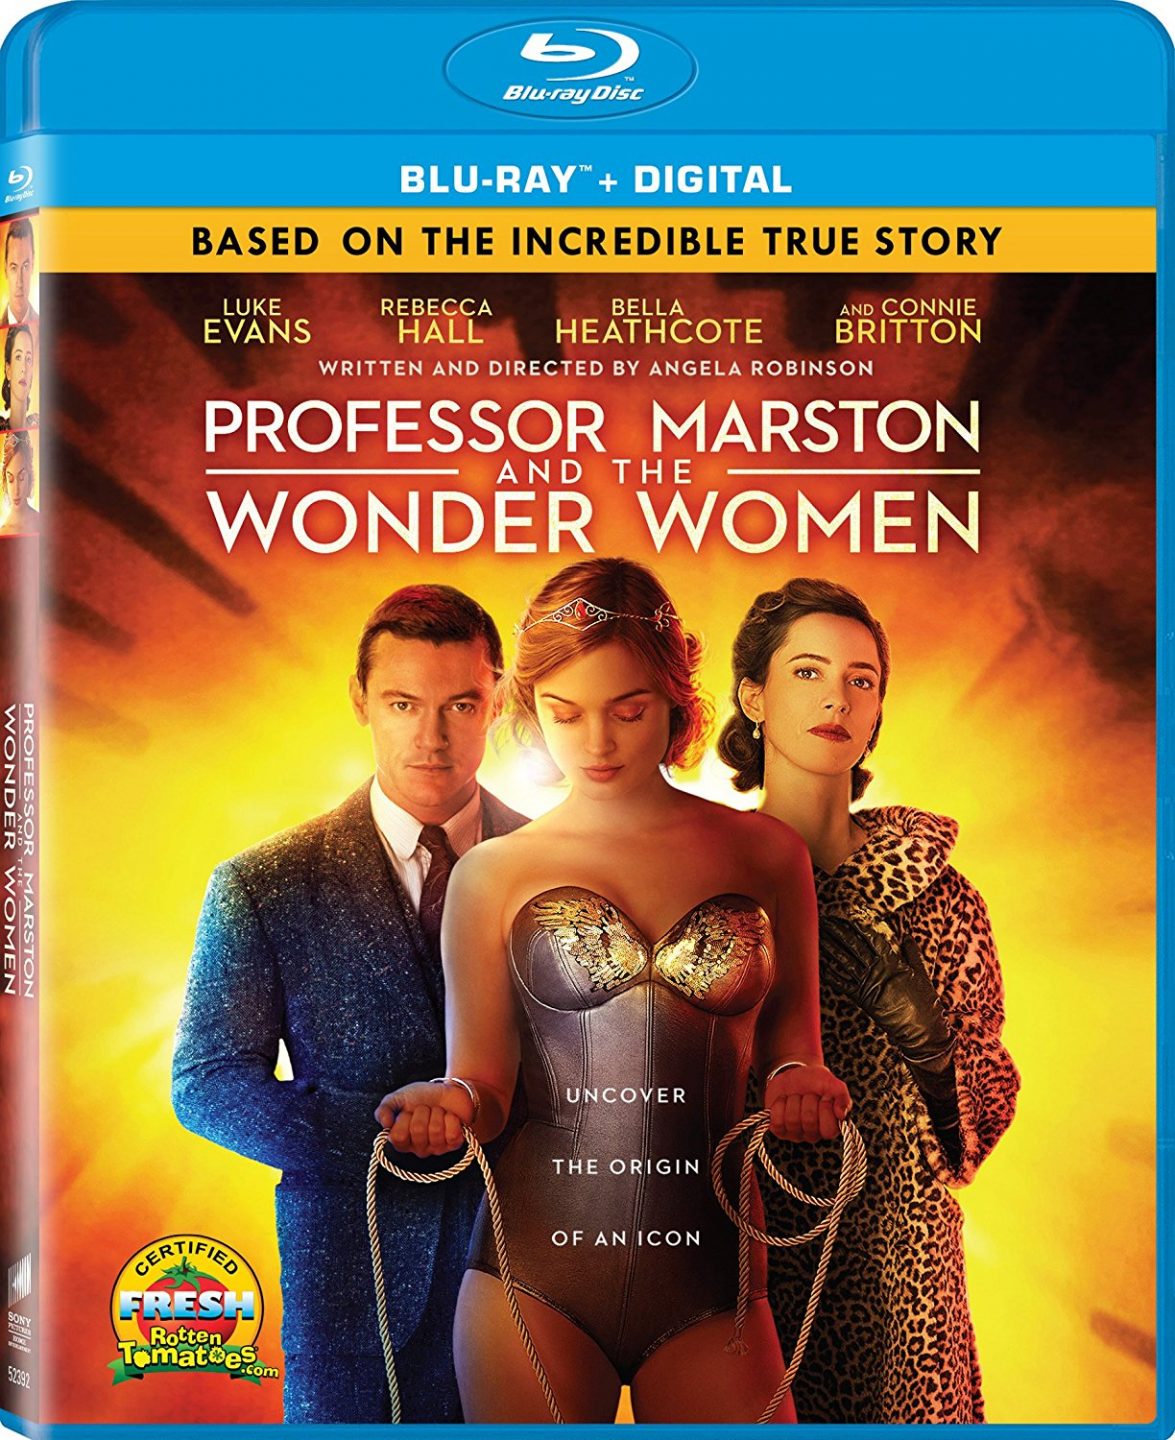 Professor Marston & The Wonder Women Blu-Ray Combo cover (Sony Pictures Home Entertainment)